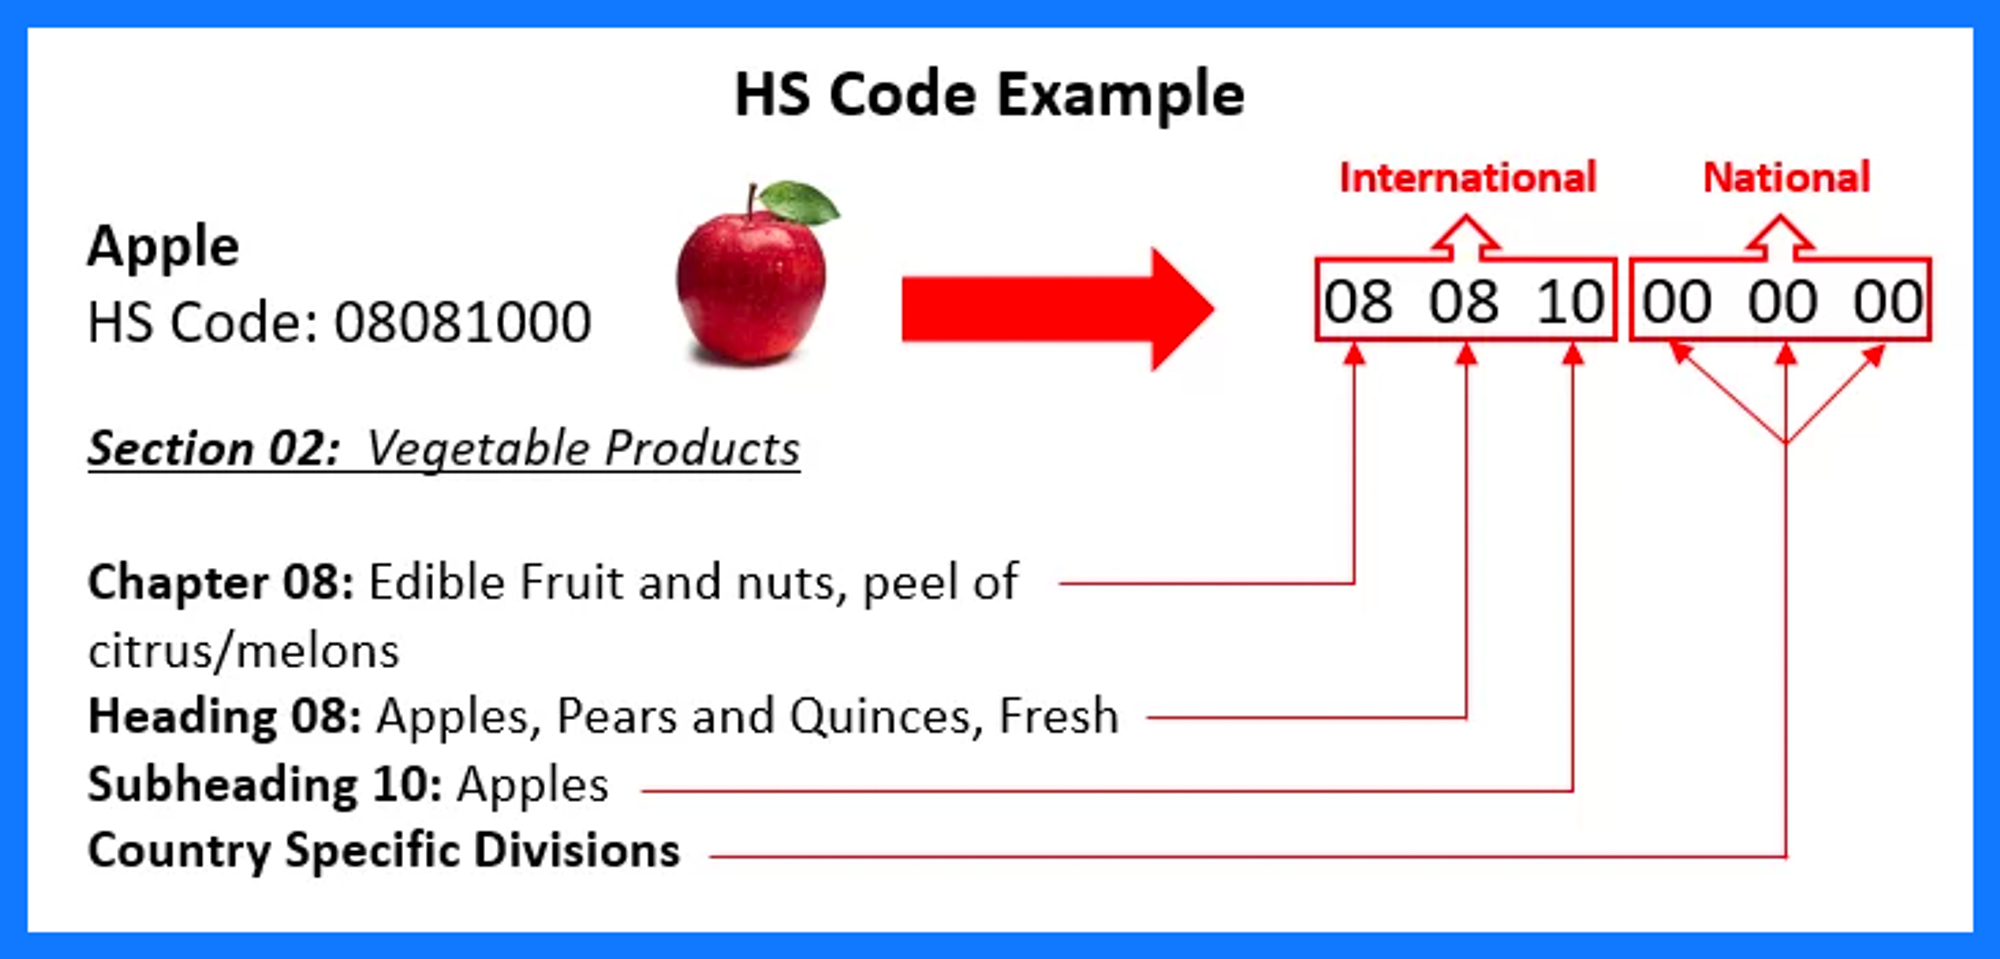 HScode example apple